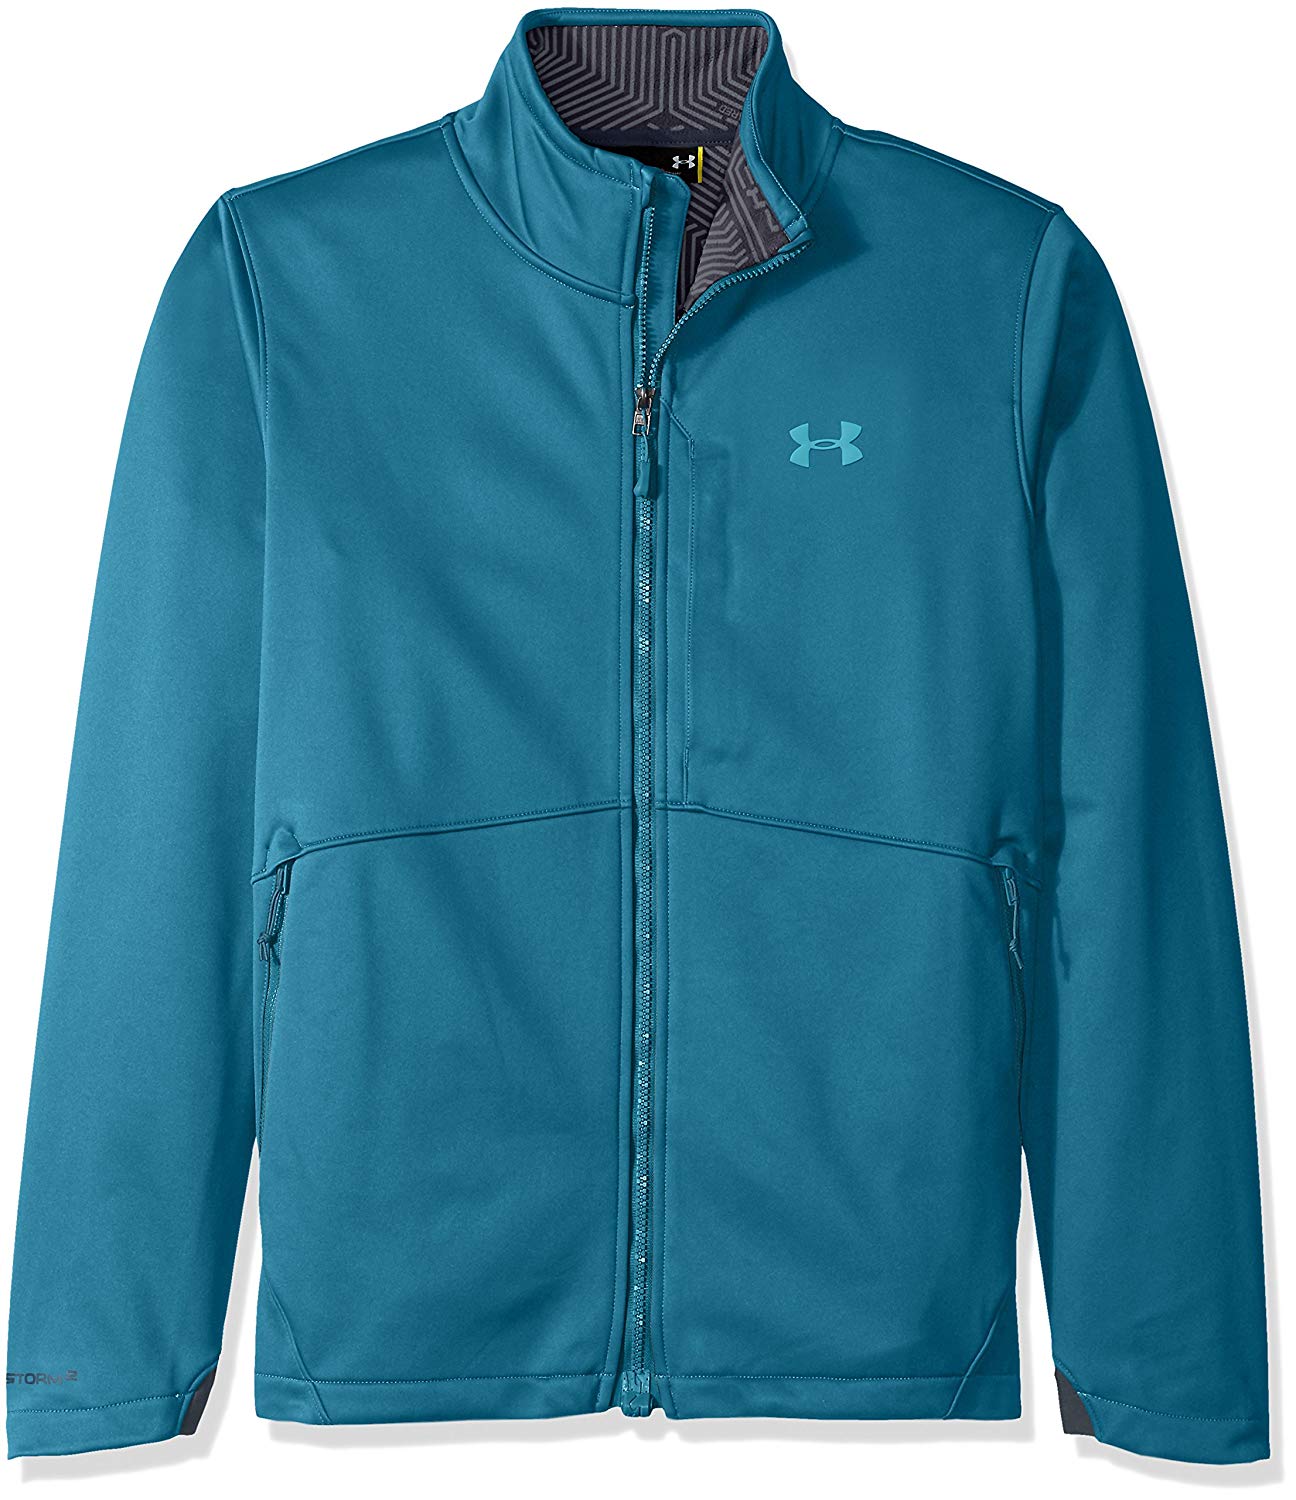 Under Armour Mens Storm Softershell Golf Jackets